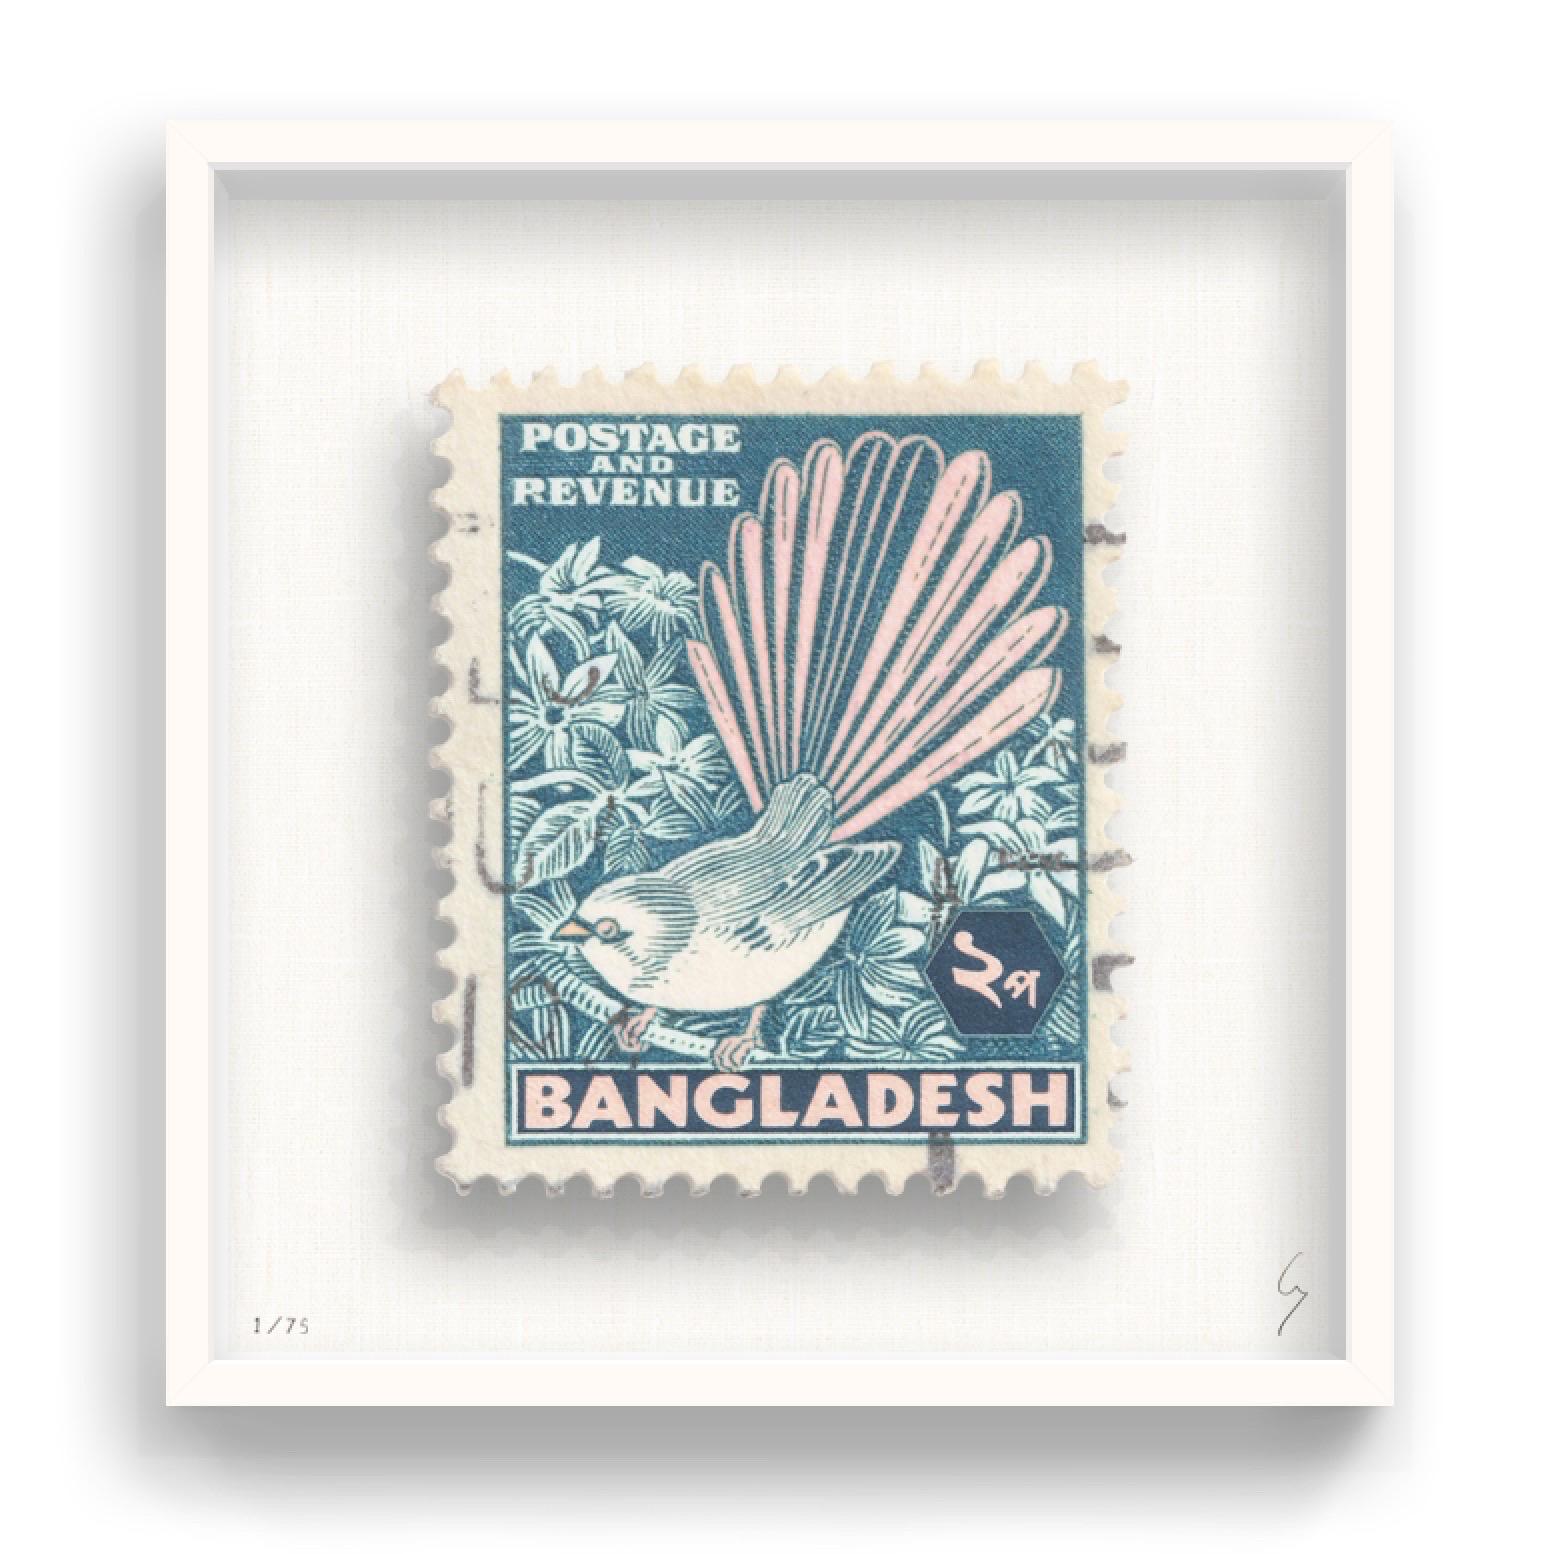 Guy Gee, Bangladesh (medium)

Hand-engraved print on 350gsm on G.F Smith card
53 x 56cm (20 4/5 x 22 2/5 in)
Frame included 
Edition of 75 

Each artwork by Guy had been digitally reimagined from an original postage stamp. Cut out and finished by